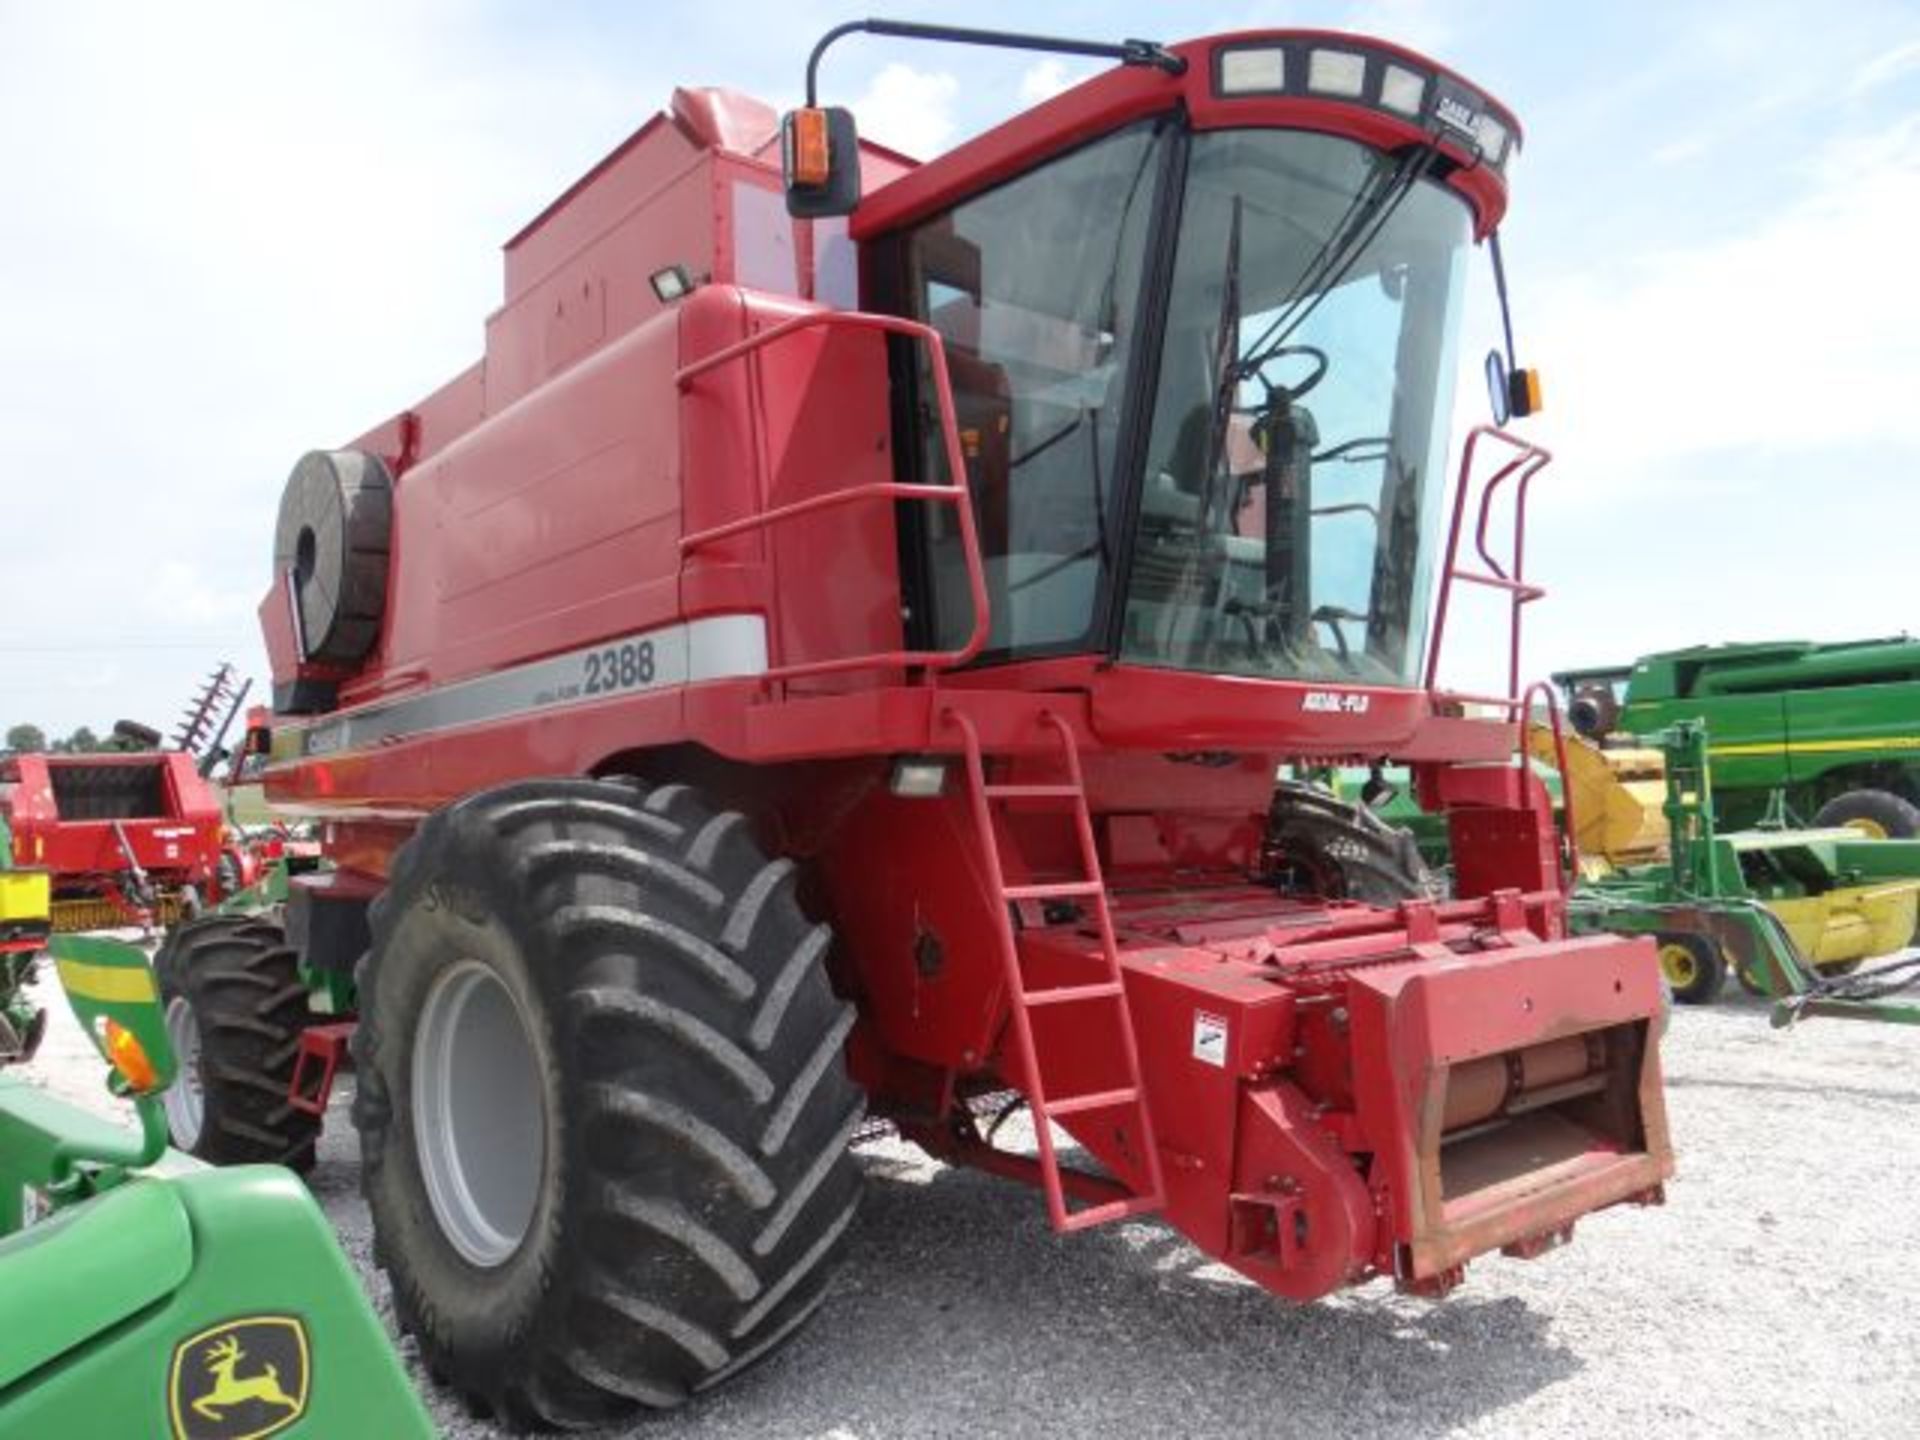 Case IH 2388 Combine, 2005 #148741, 3390/2616 hrs, PRWD, 18.4R26 Rear Tires, 900R32 Front Tires, CM, - Image 2 of 5